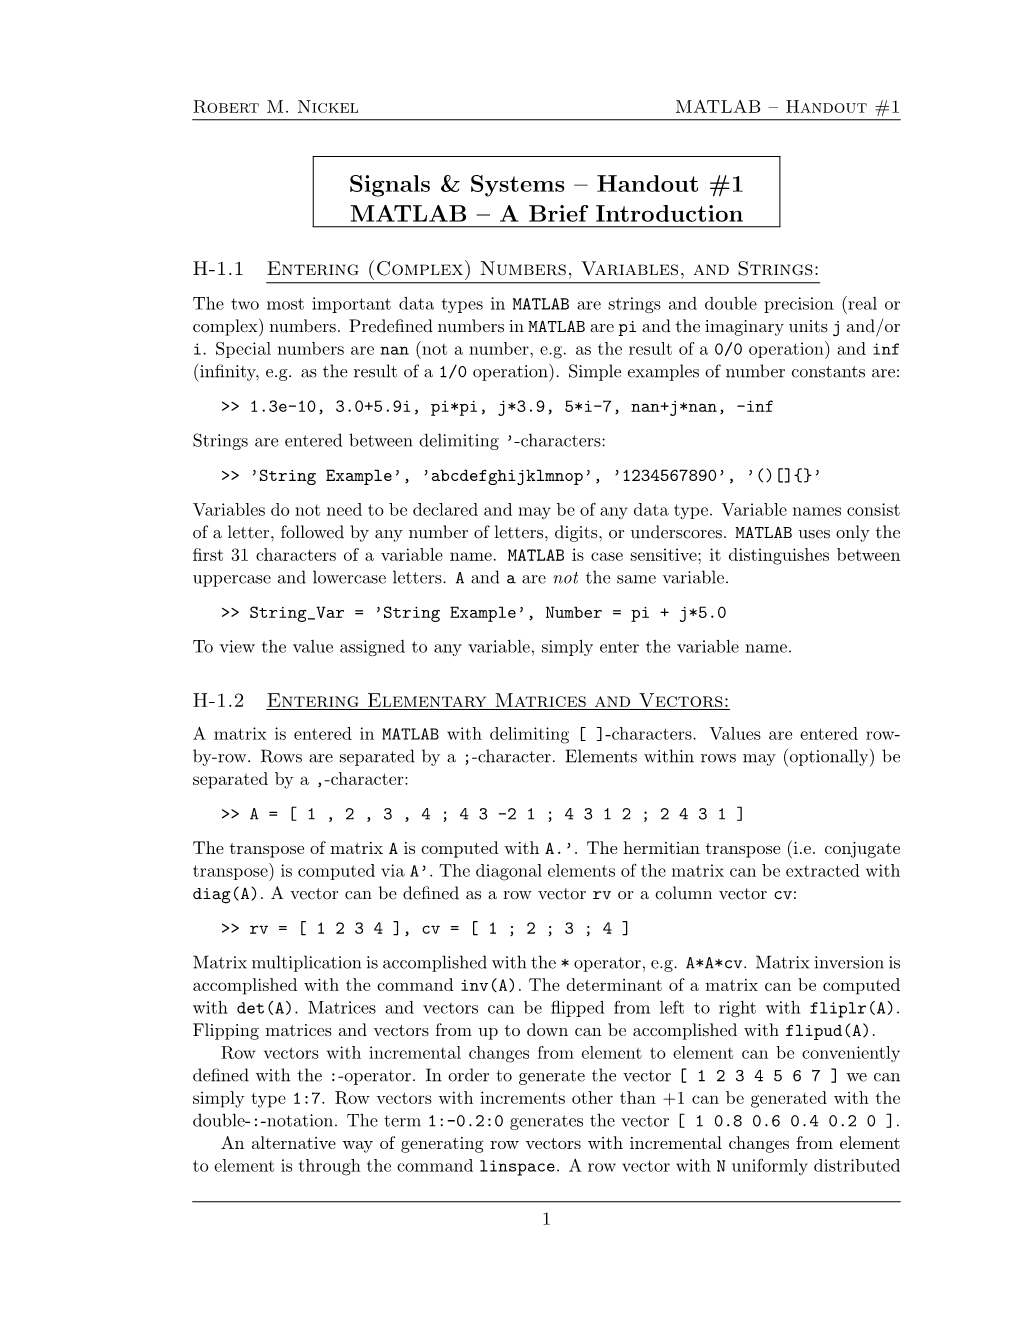 Signals & Systems – Handout #1 MATLAB – a Brief Introduction